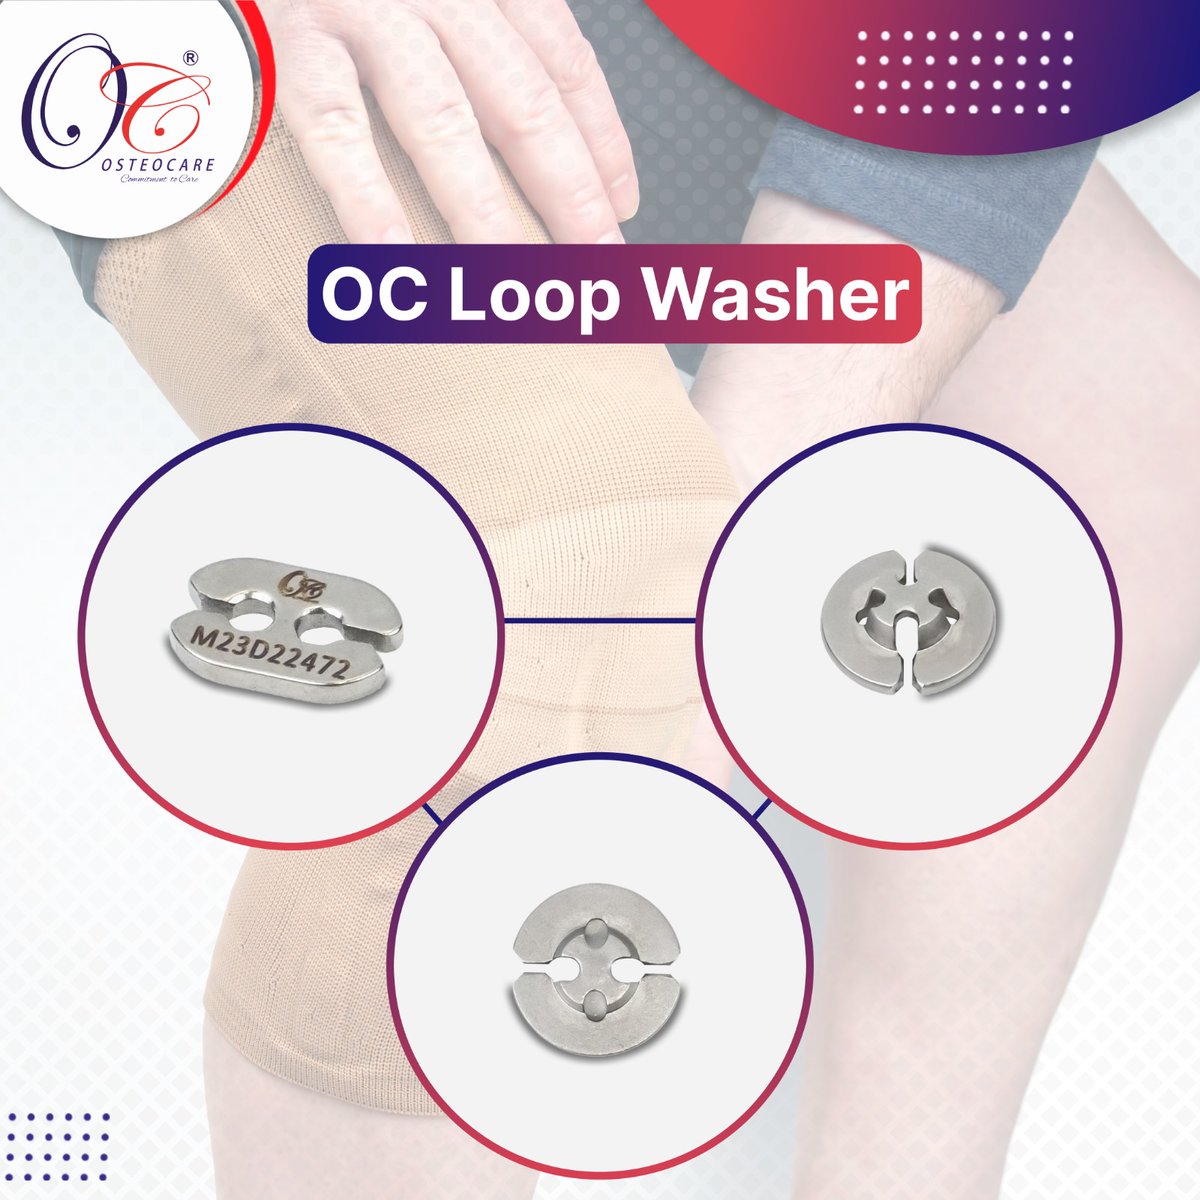 Experience OC Loop Washer-
Revolutionize ACL reconstruction with the Loop Washer – the key to secure graft fixation and precision in all-inside & transtibial techniques. 
#OrthoInnovation #SurgicalAdvancements #MedicalTechnology #ACLRecovery #GraftFixation #TranstibialProcedure